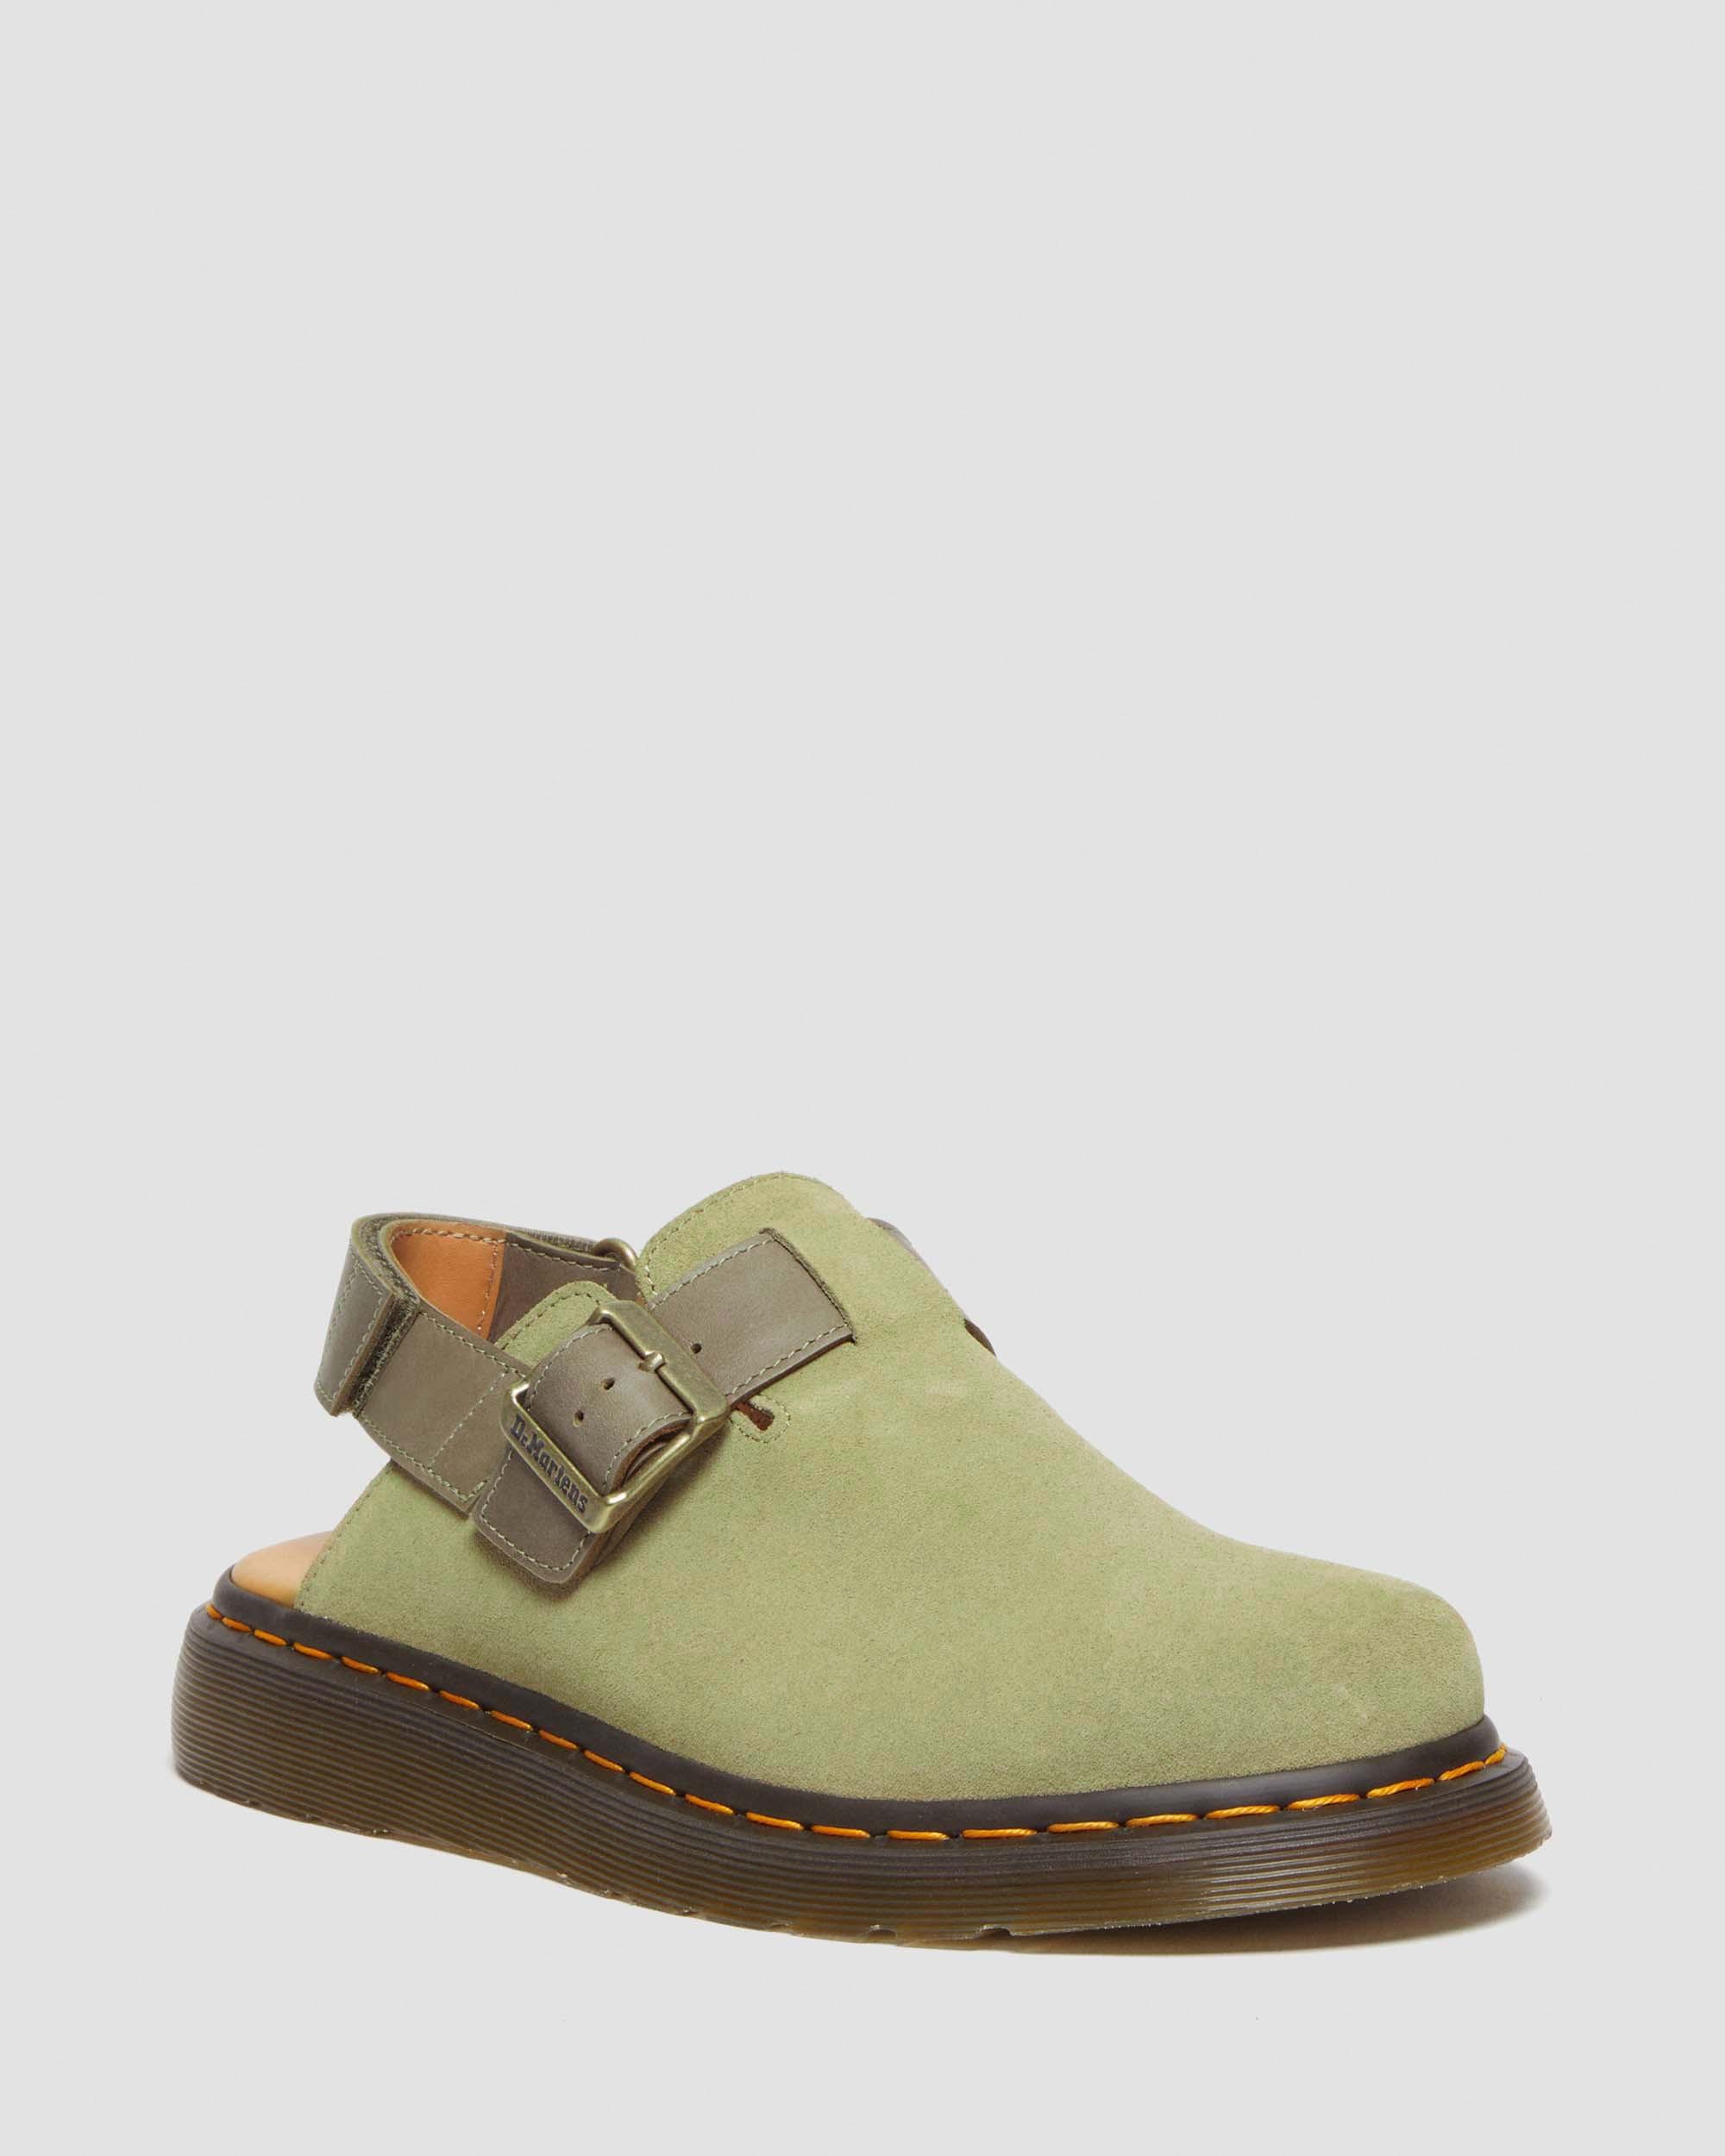 Jorge II Suede & Leather Slingback Mules in Pale Olive | Dr. Martens